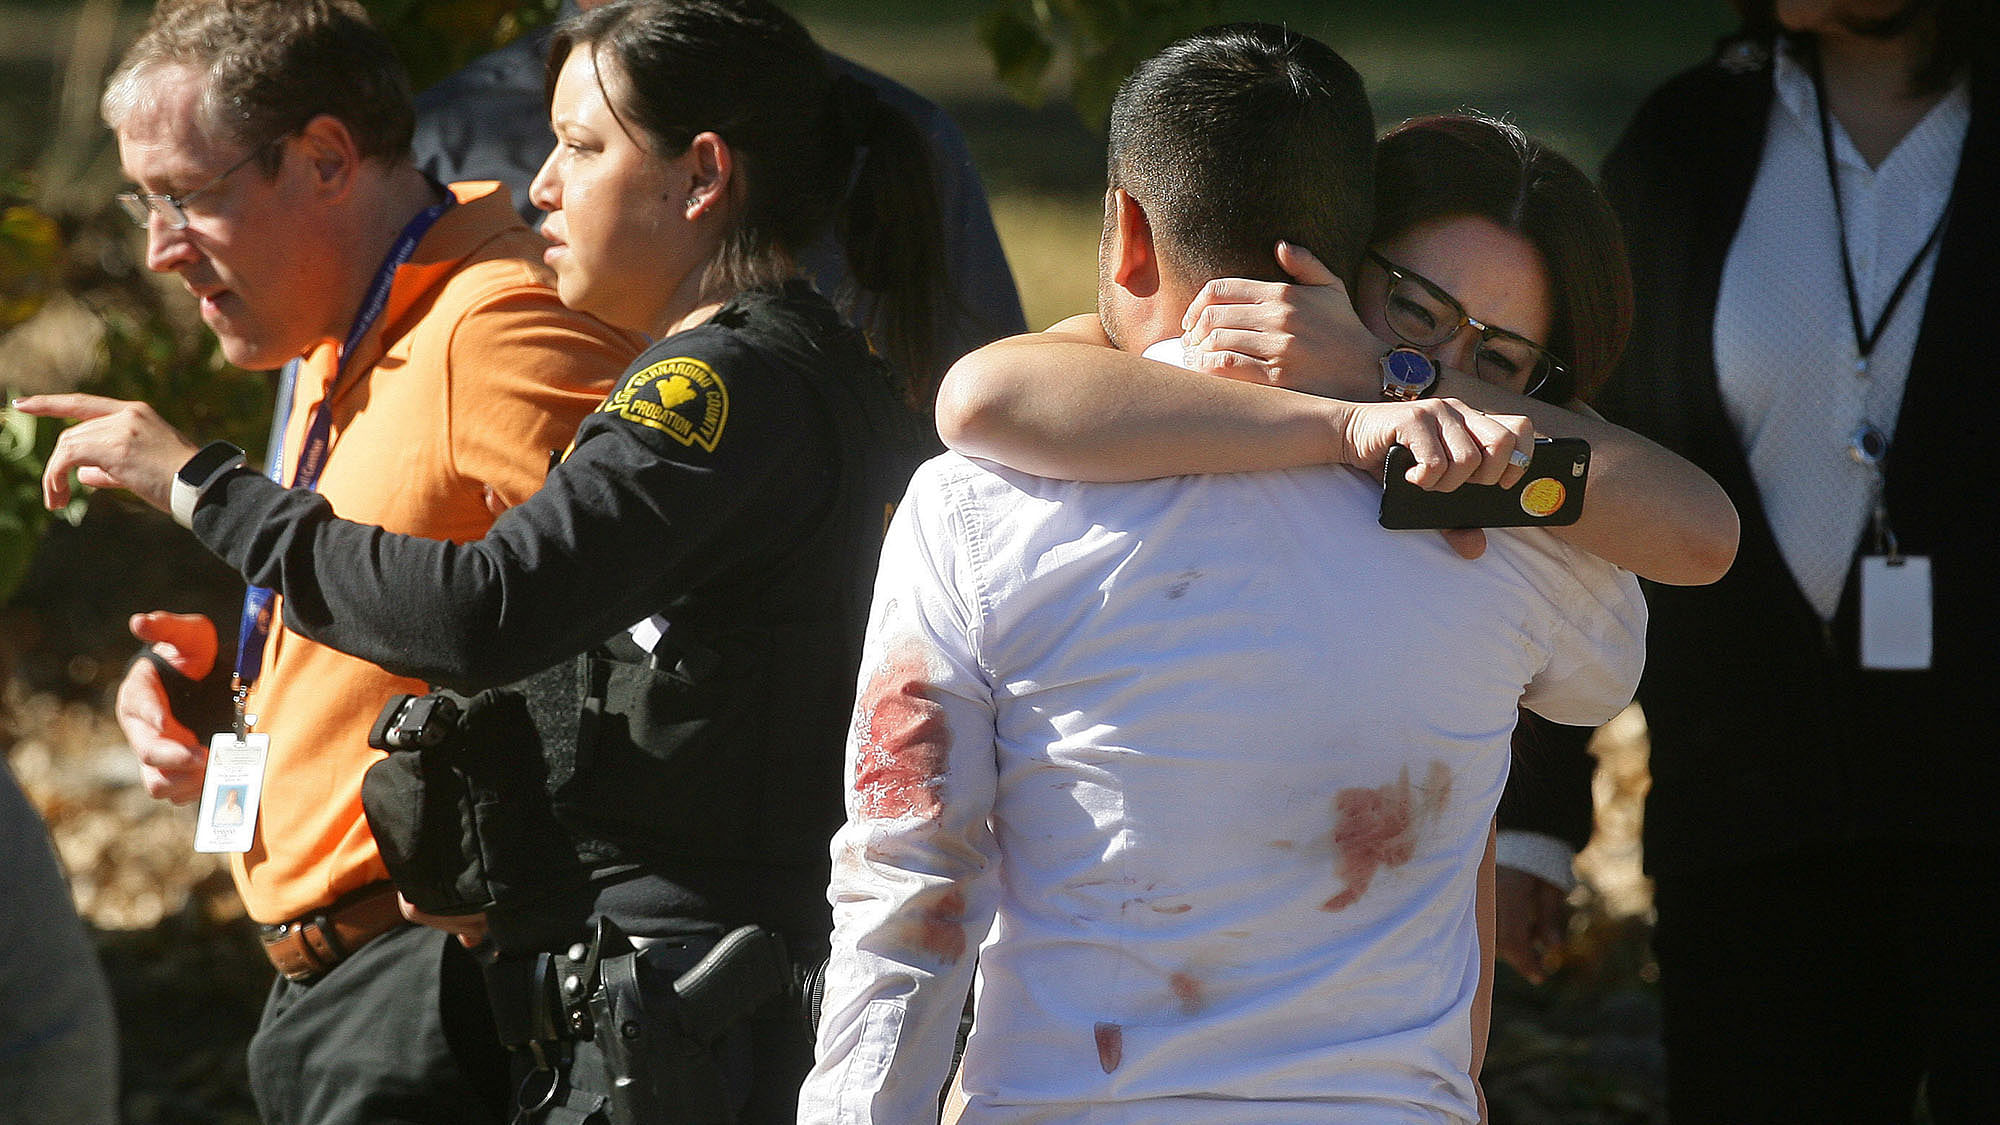 A couple embraces following the California shooting that
killed multiple people at a social services facility. (Photo: AP)